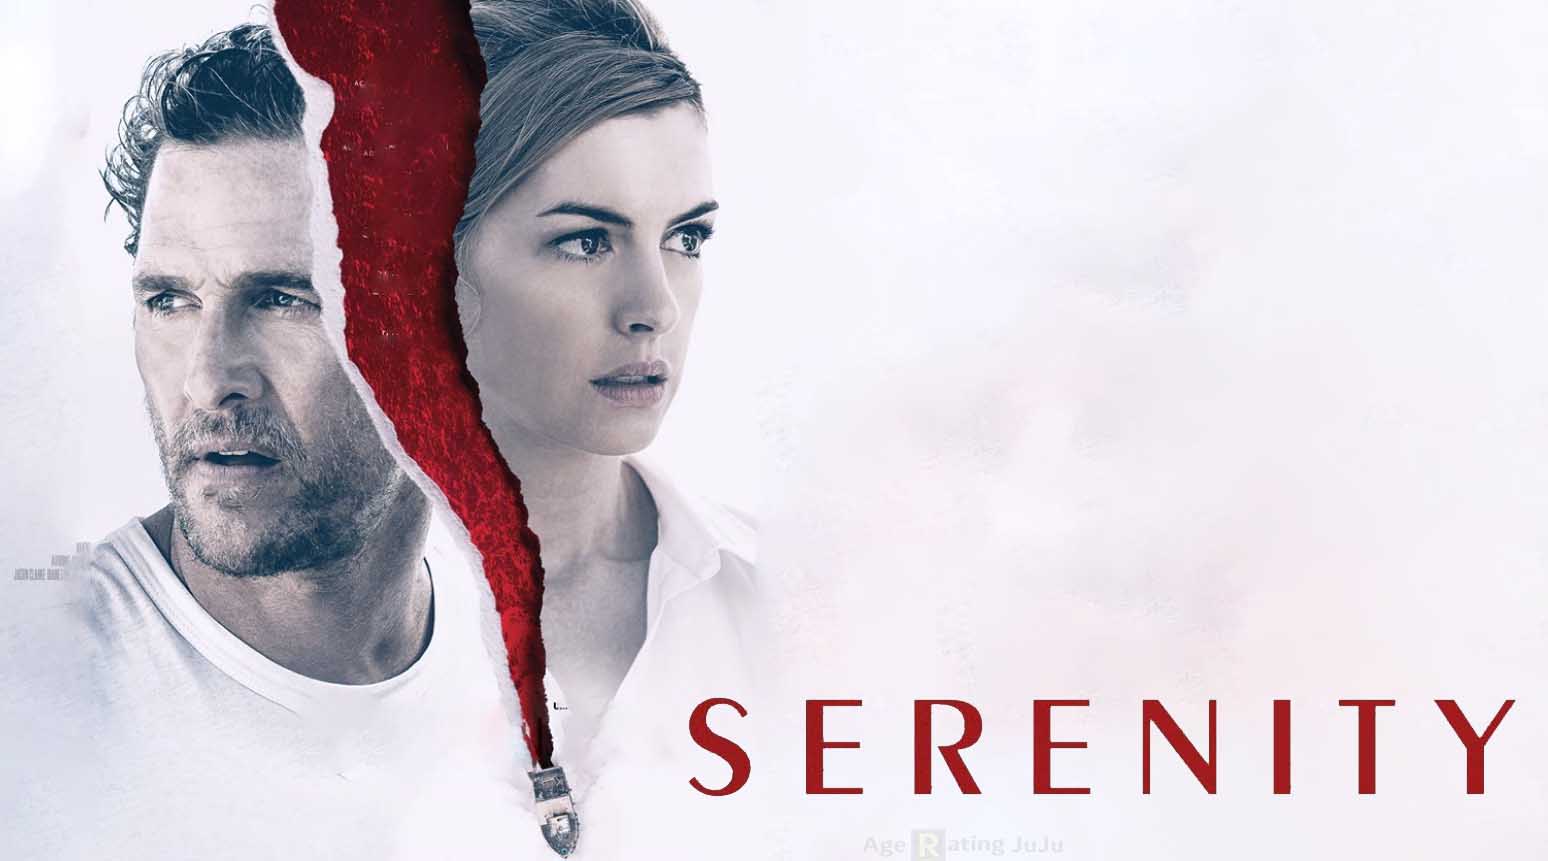 Serenity Age Rating 2018 - Movie Poster Images and Wallpapers